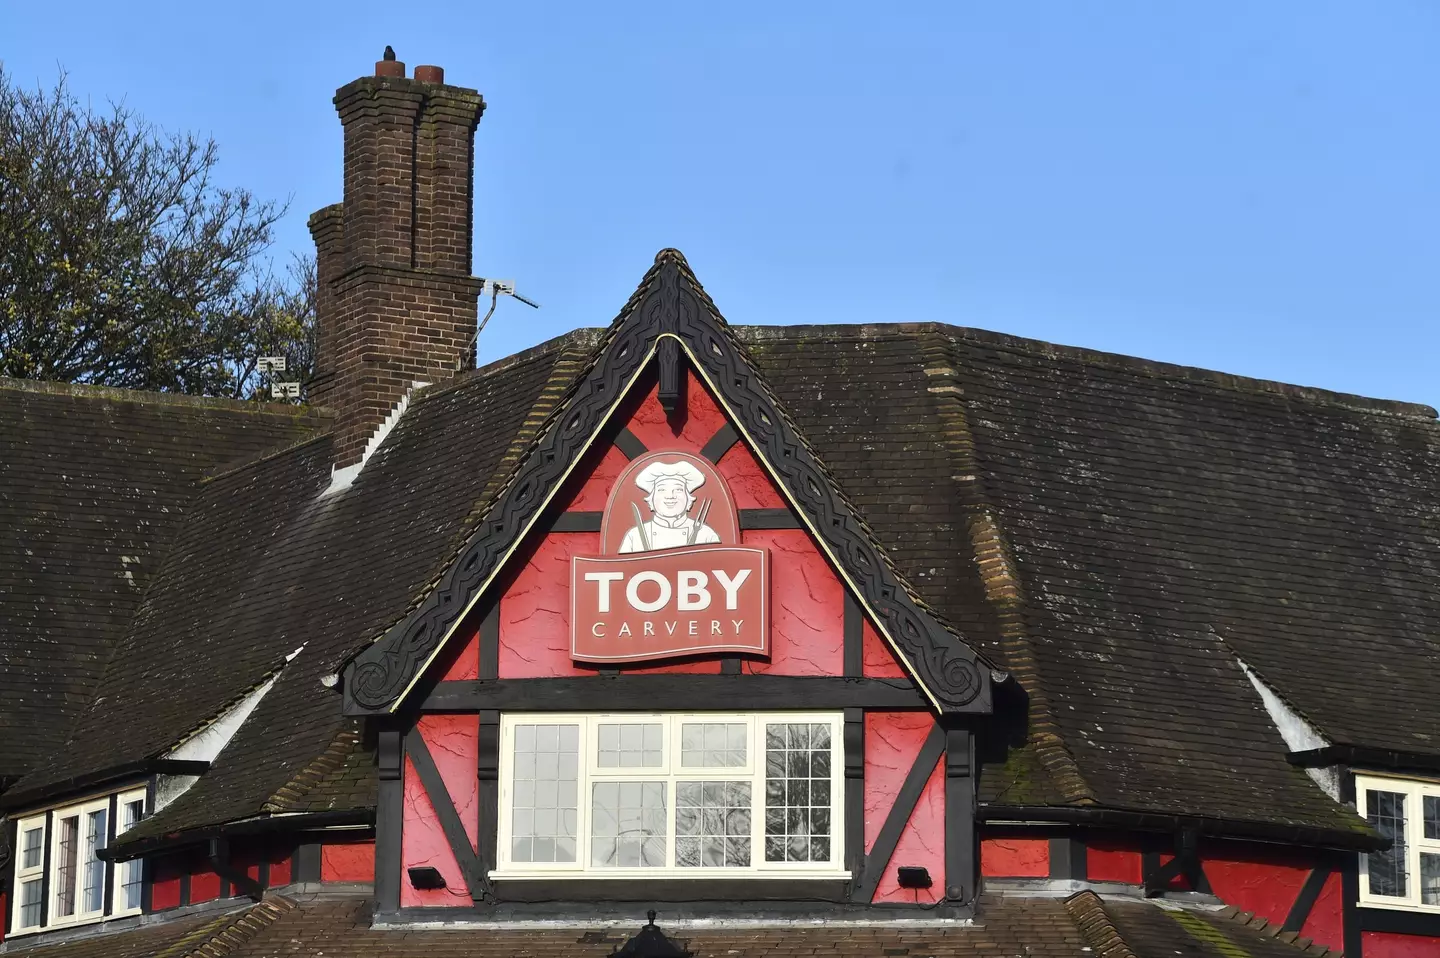 The order was placed to a Toby Carvery.